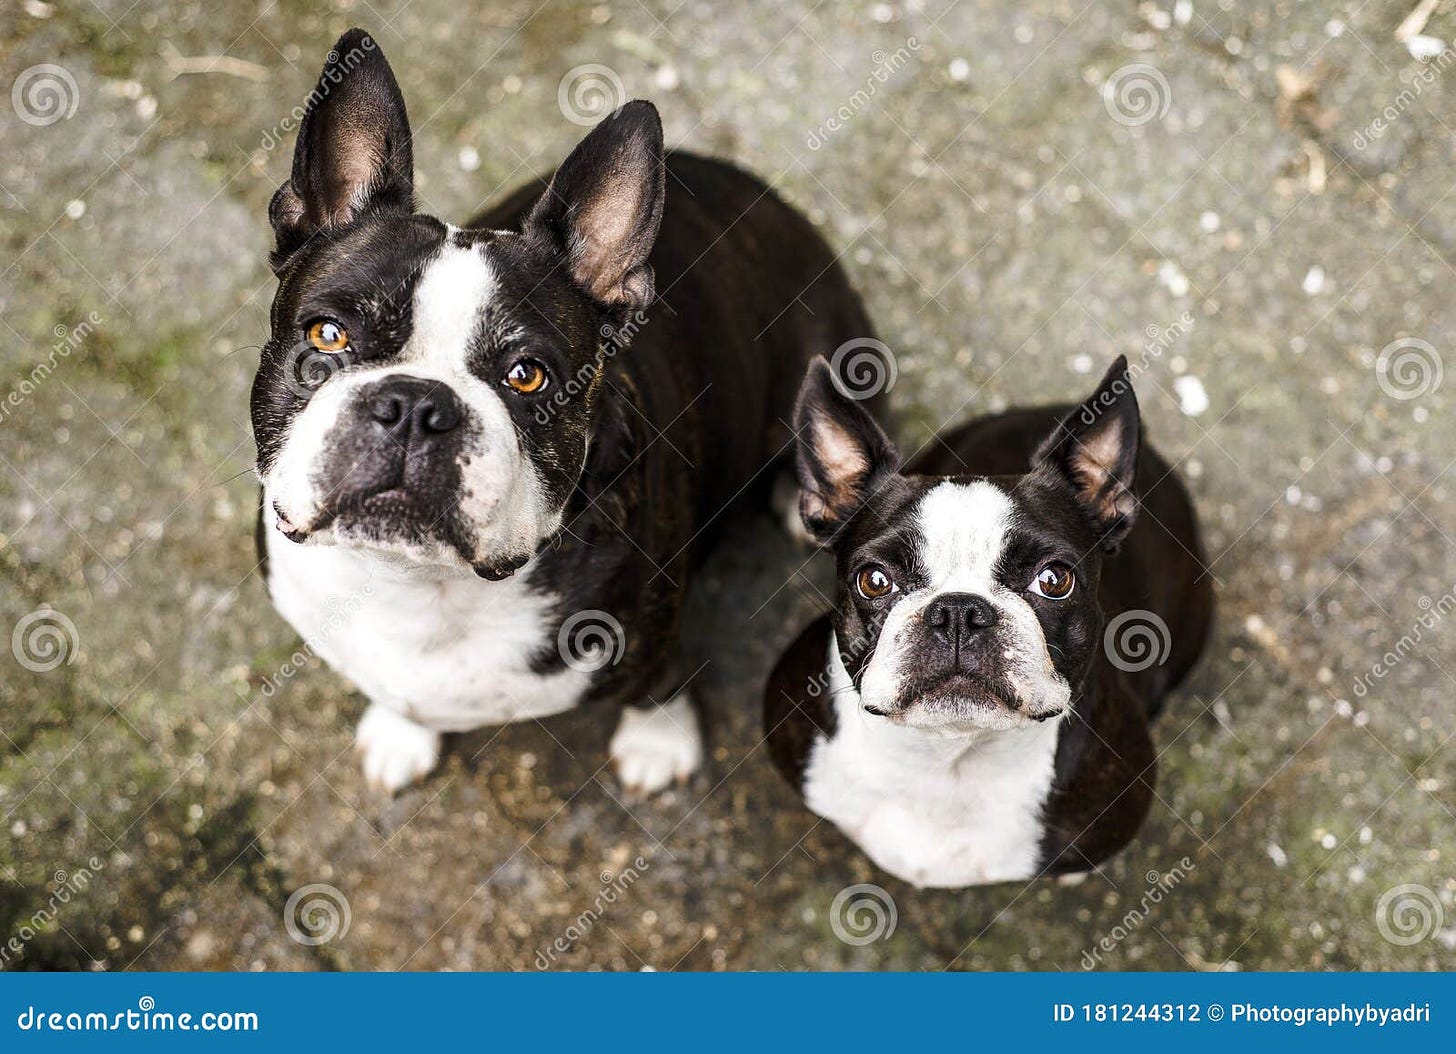 Two Boston Terrier Dogs Looking Up at the Camera Stock Photo - Image of ...